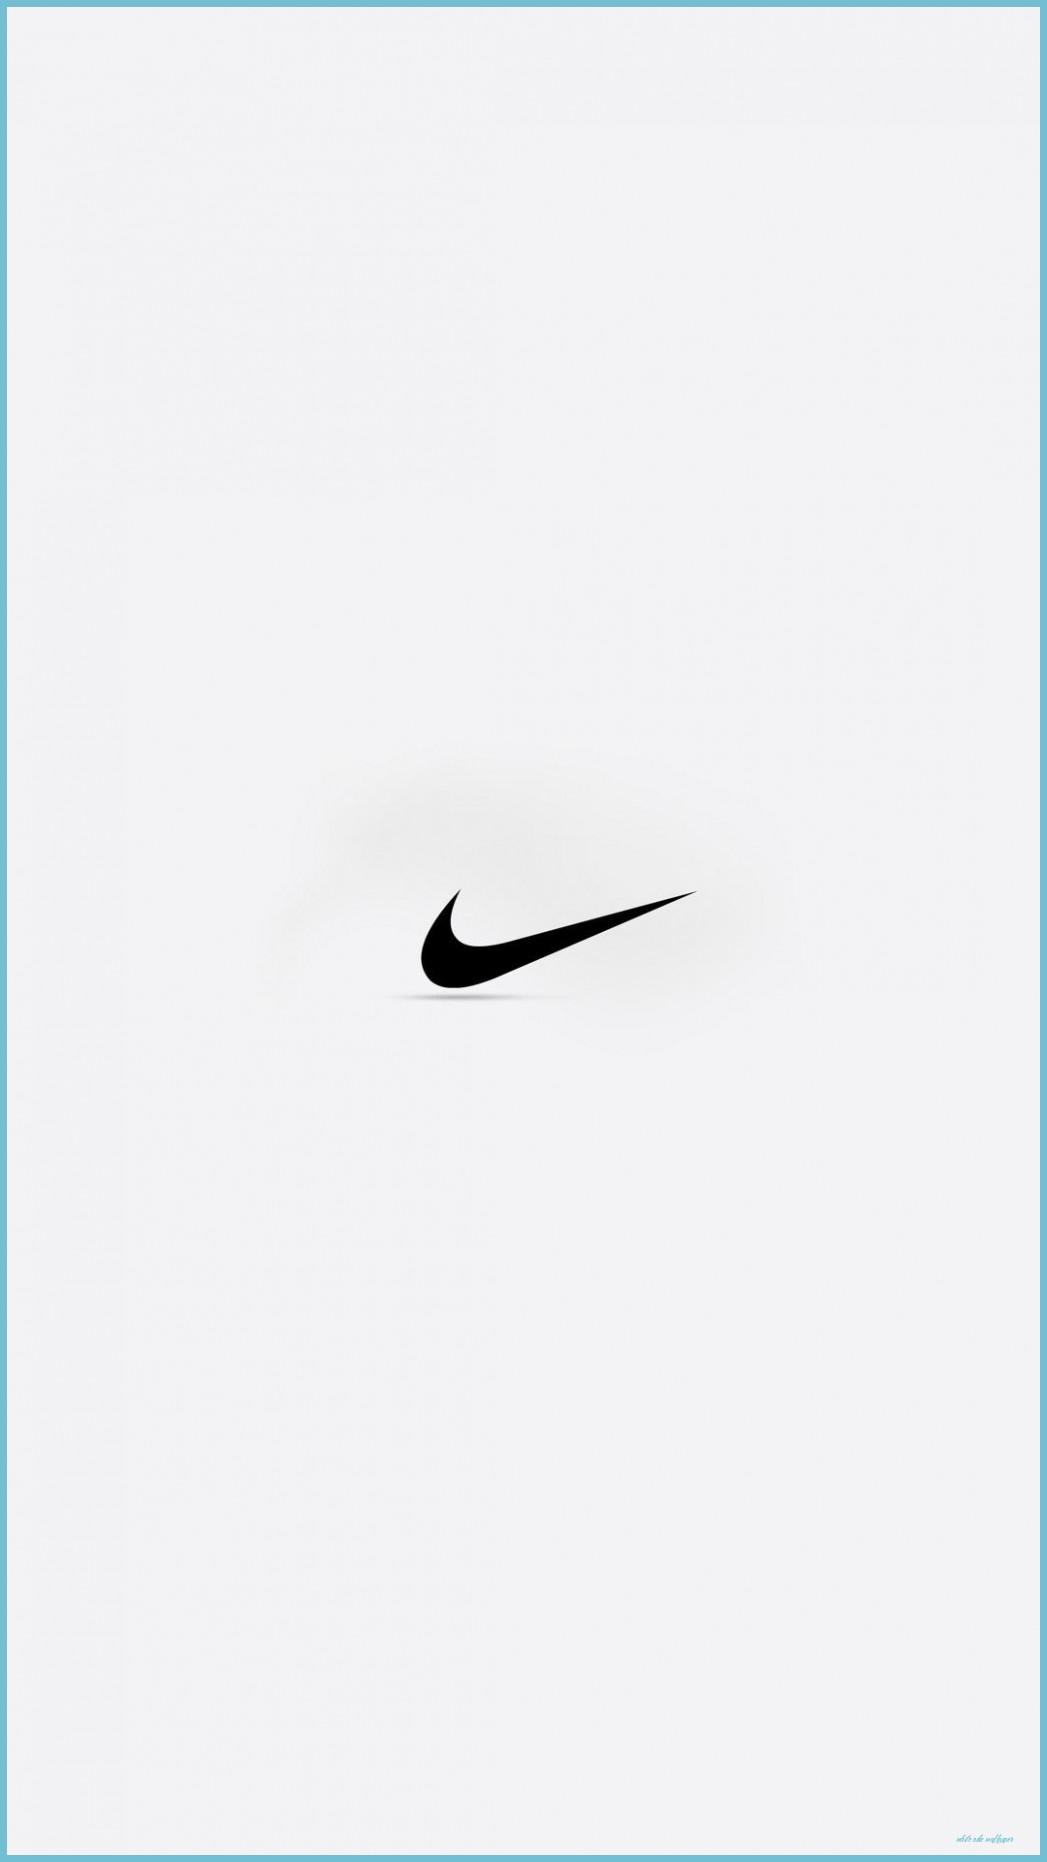 White Nike Wallpapers - Top Free White Nike Backgrounds - WallpaperAccess